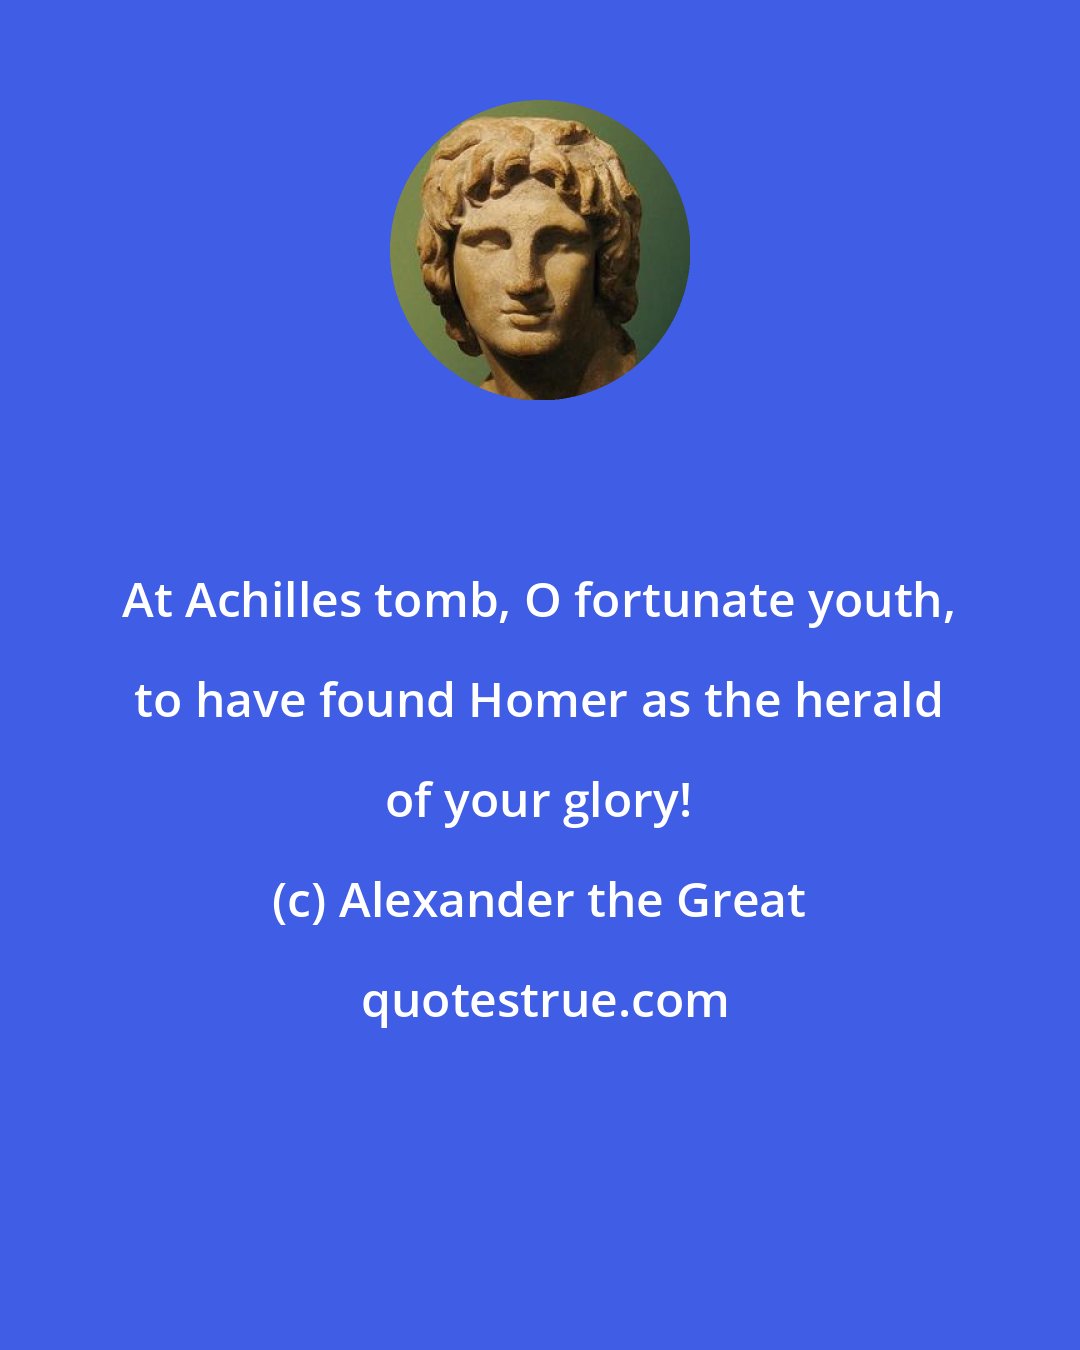 Alexander the Great: At Achilles tomb, O fortunate youth, to have found Homer as the herald of your glory!